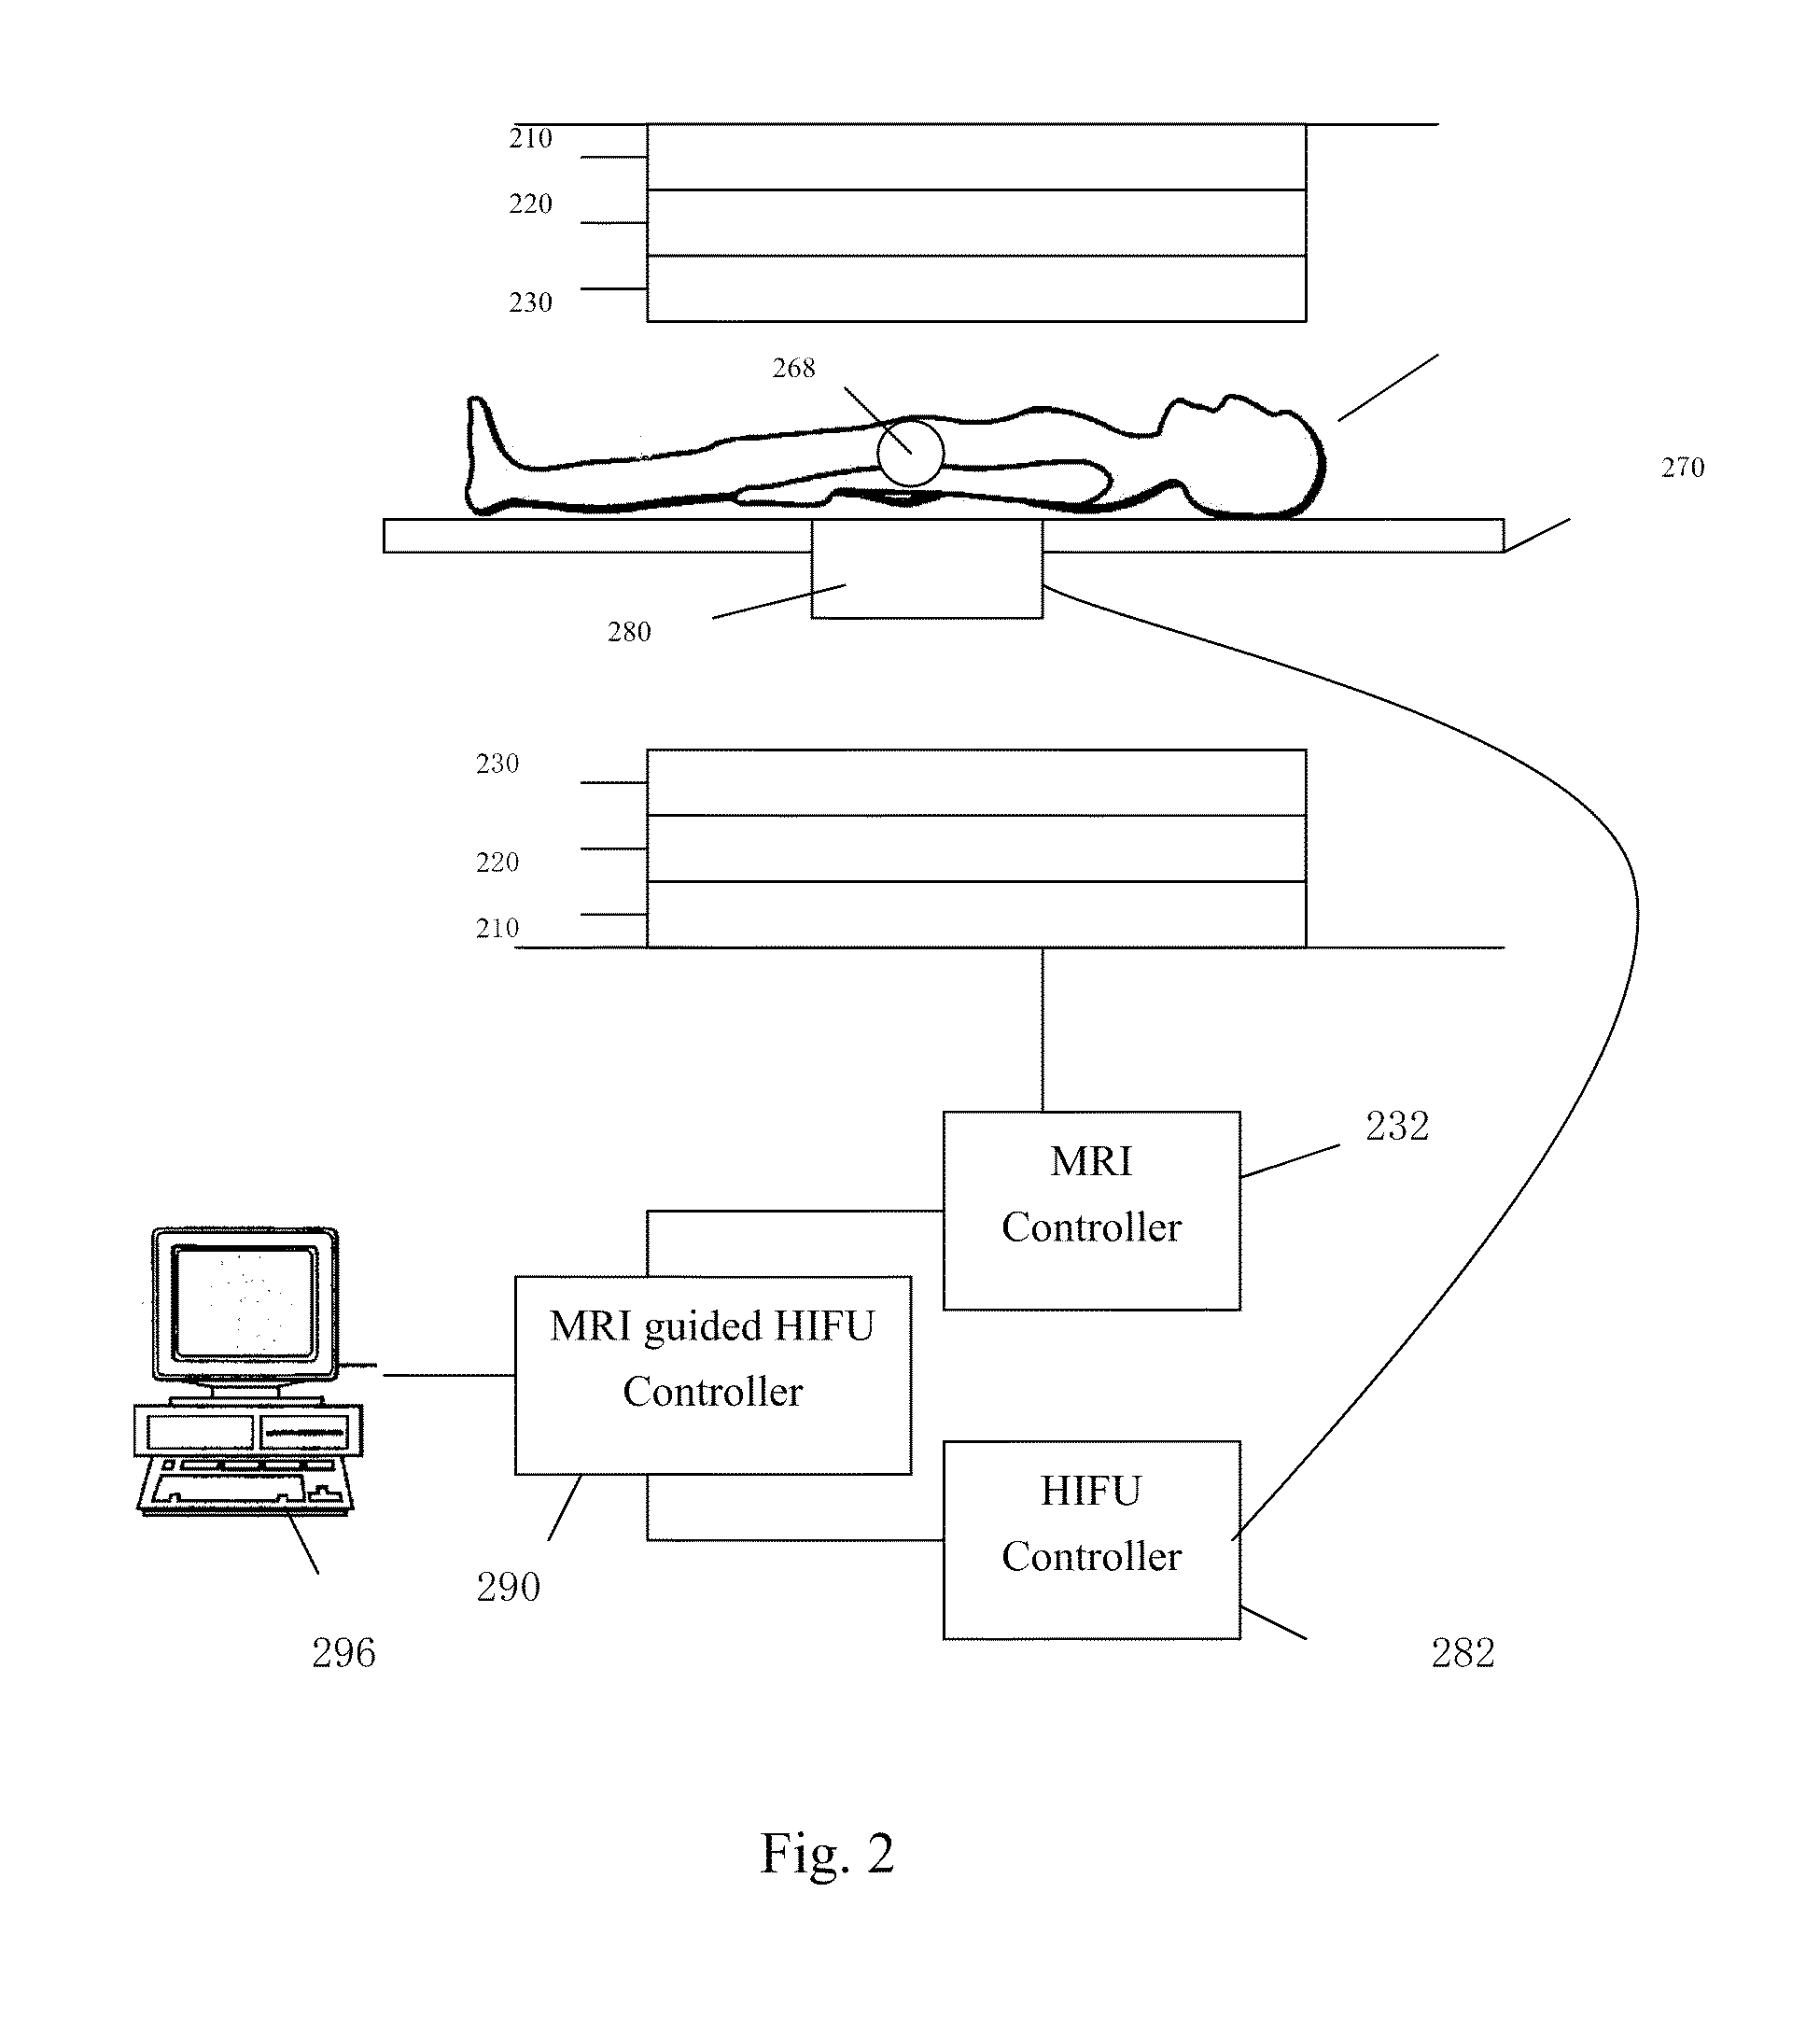 Receiving surface coils used during thermal ablation procedure